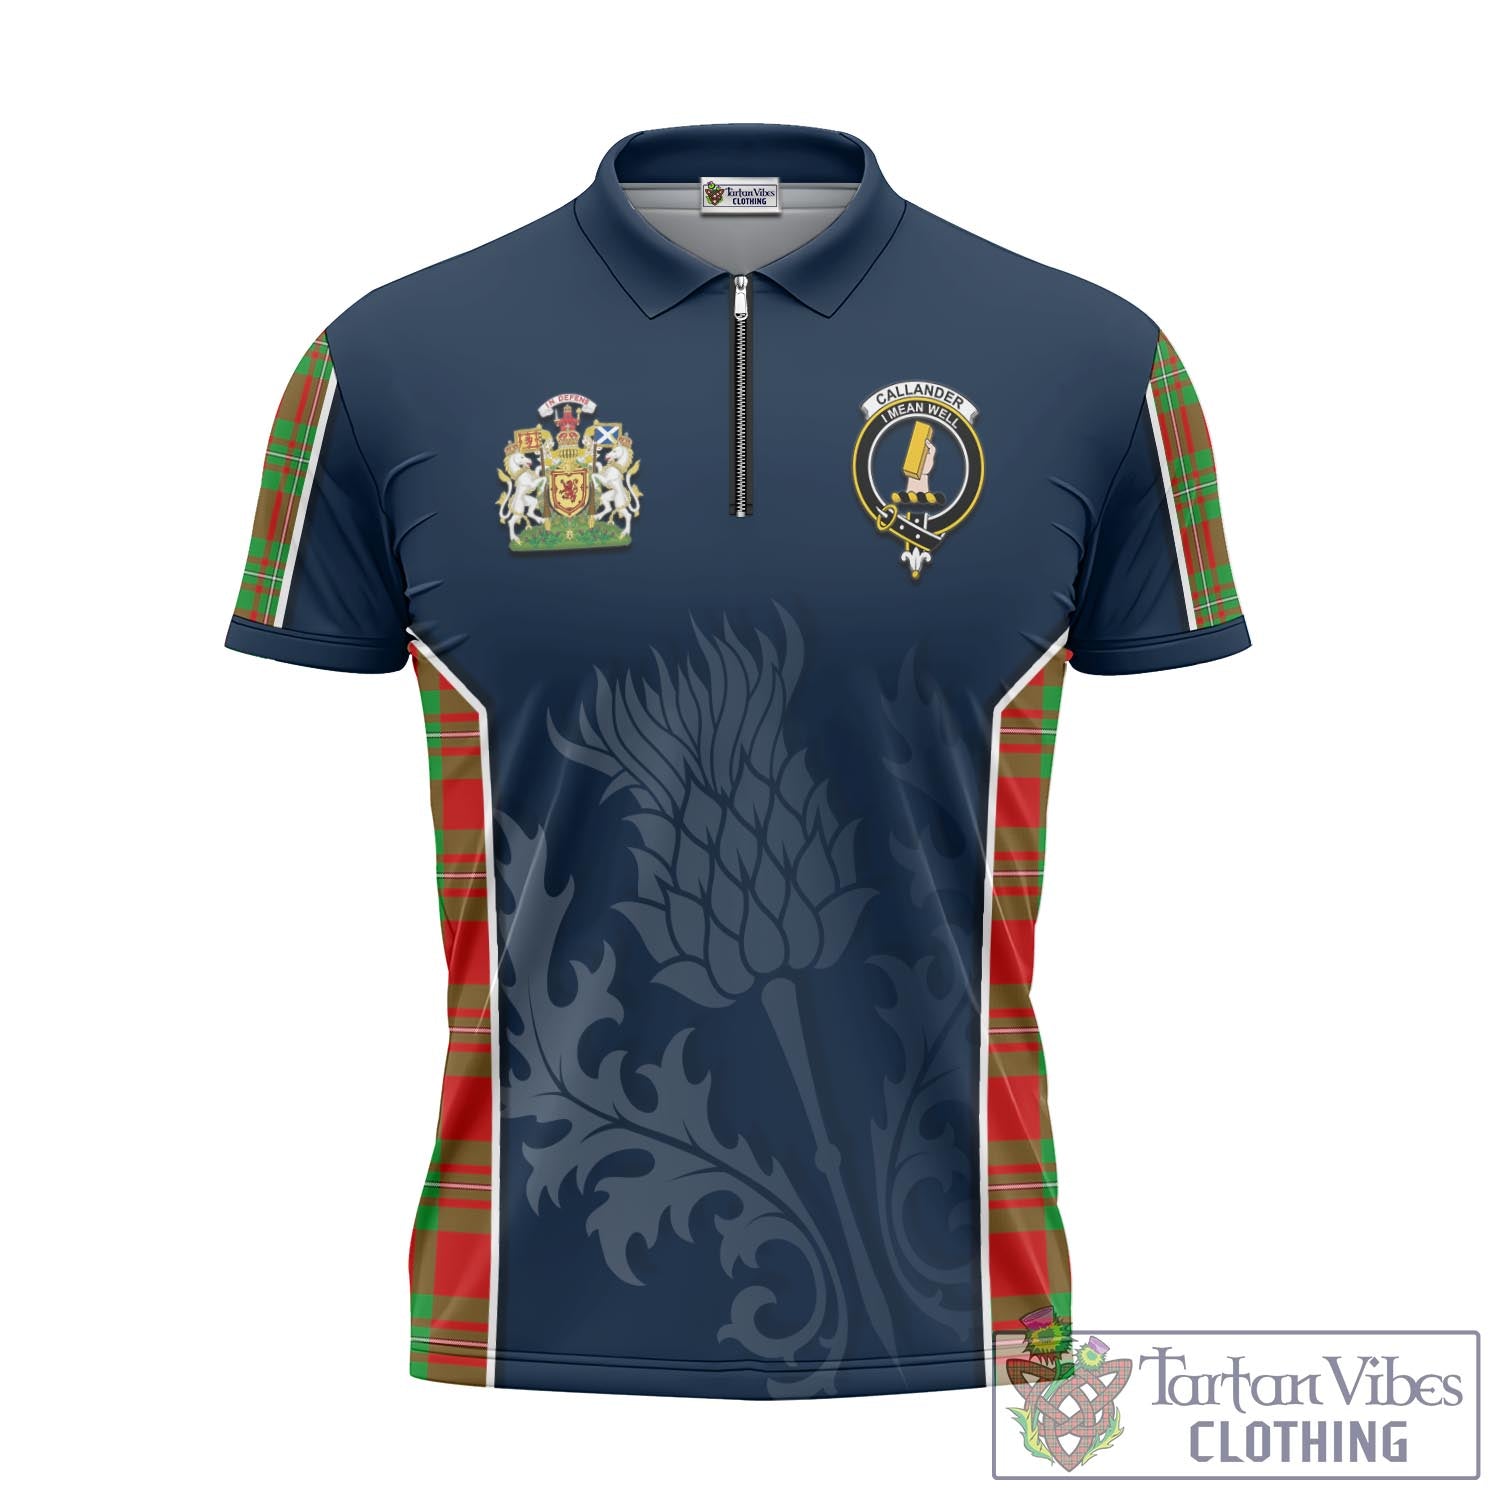 Tartan Vibes Clothing Callander Modern Tartan Zipper Polo Shirt with Family Crest and Scottish Thistle Vibes Sport Style